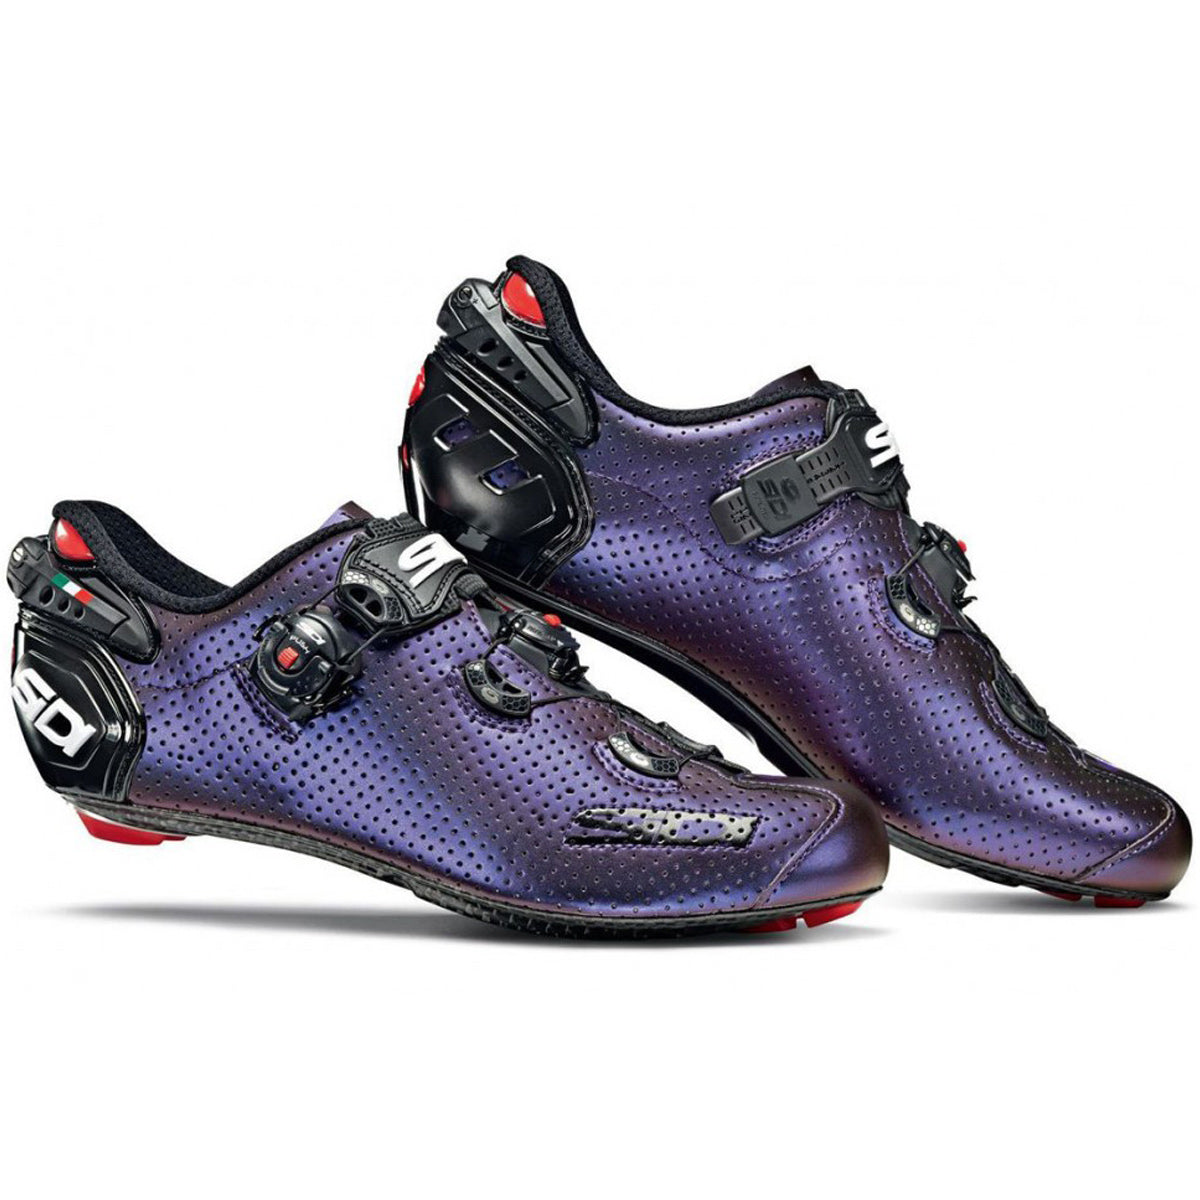 Sidi Wire 2 Carbon Air Limited shoes - Iridescent